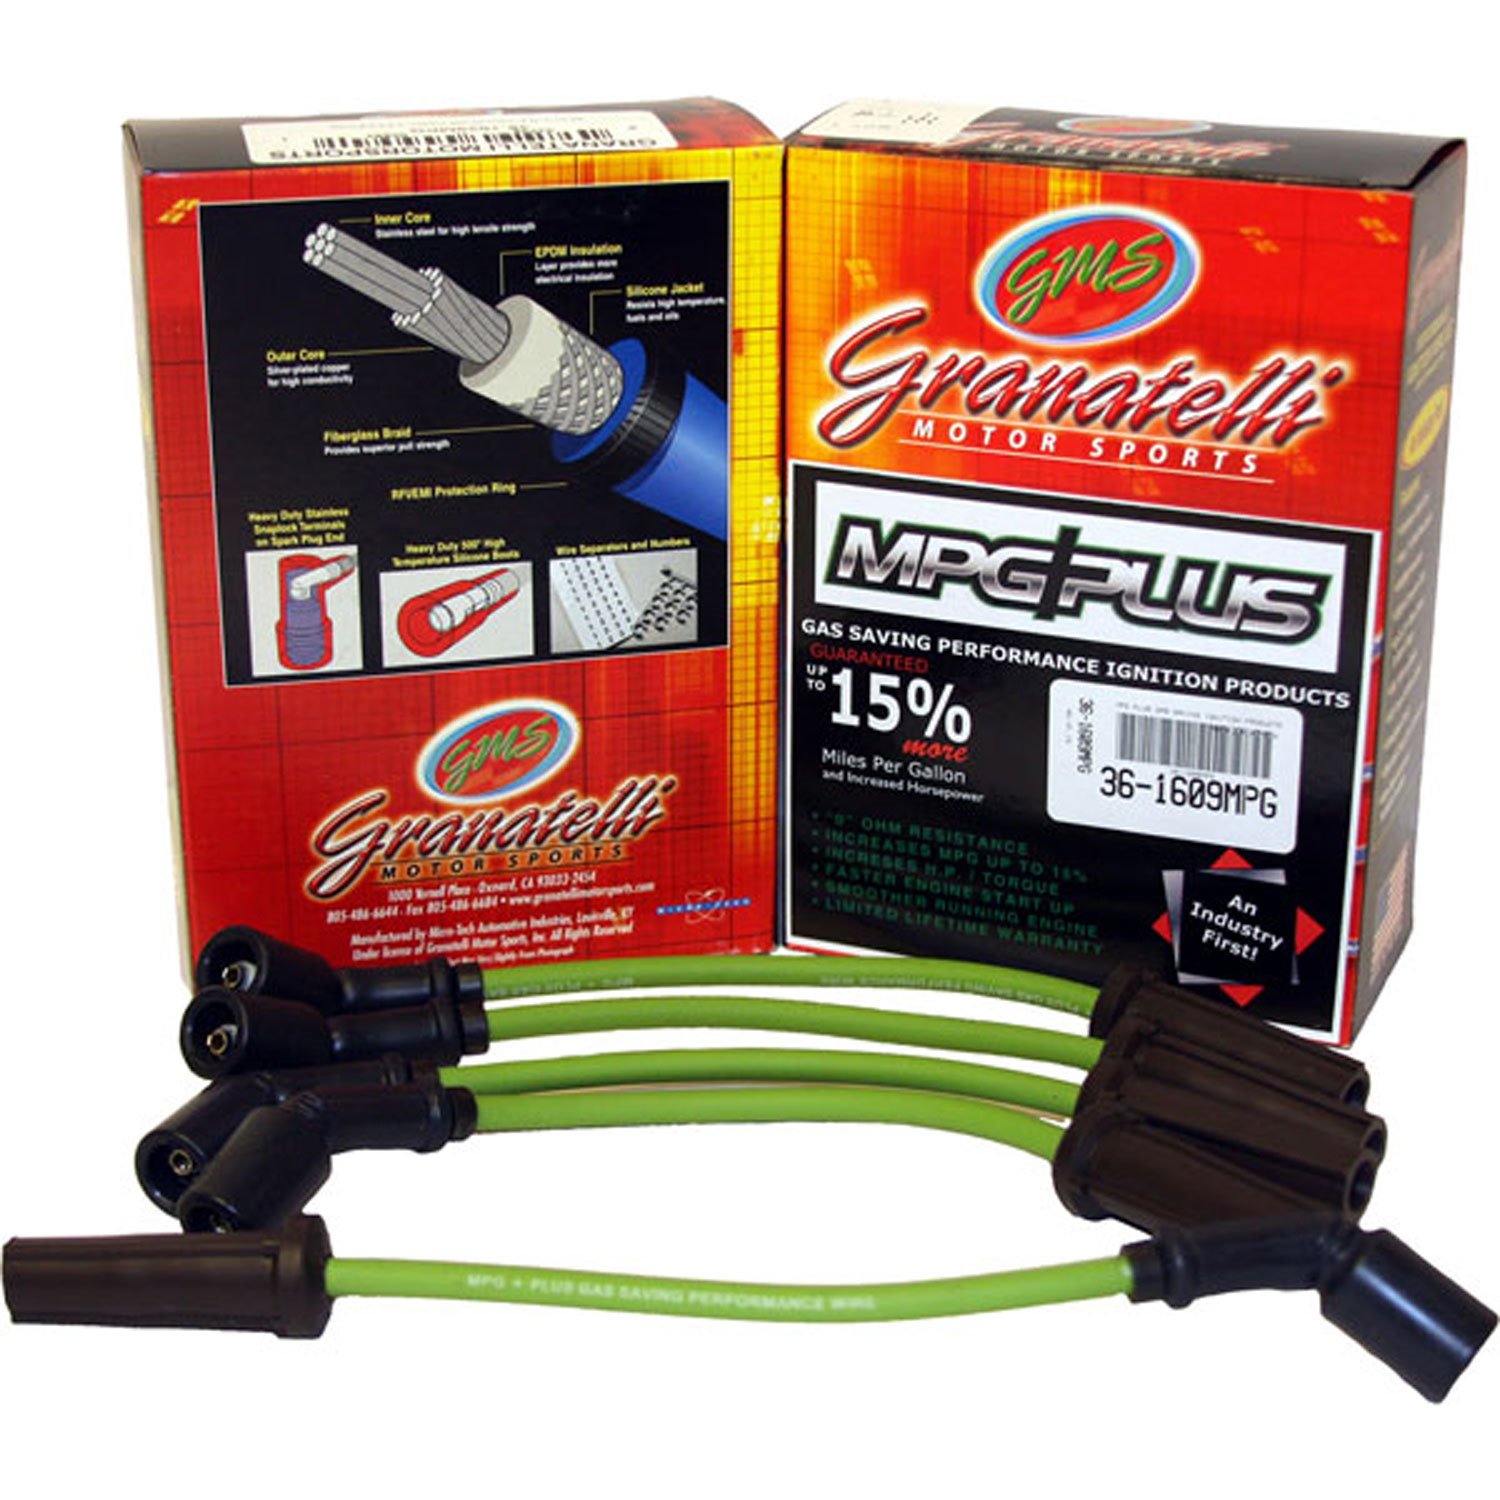 MPG Wires FORD CONTOUR 6CYL 2.5L 95-00